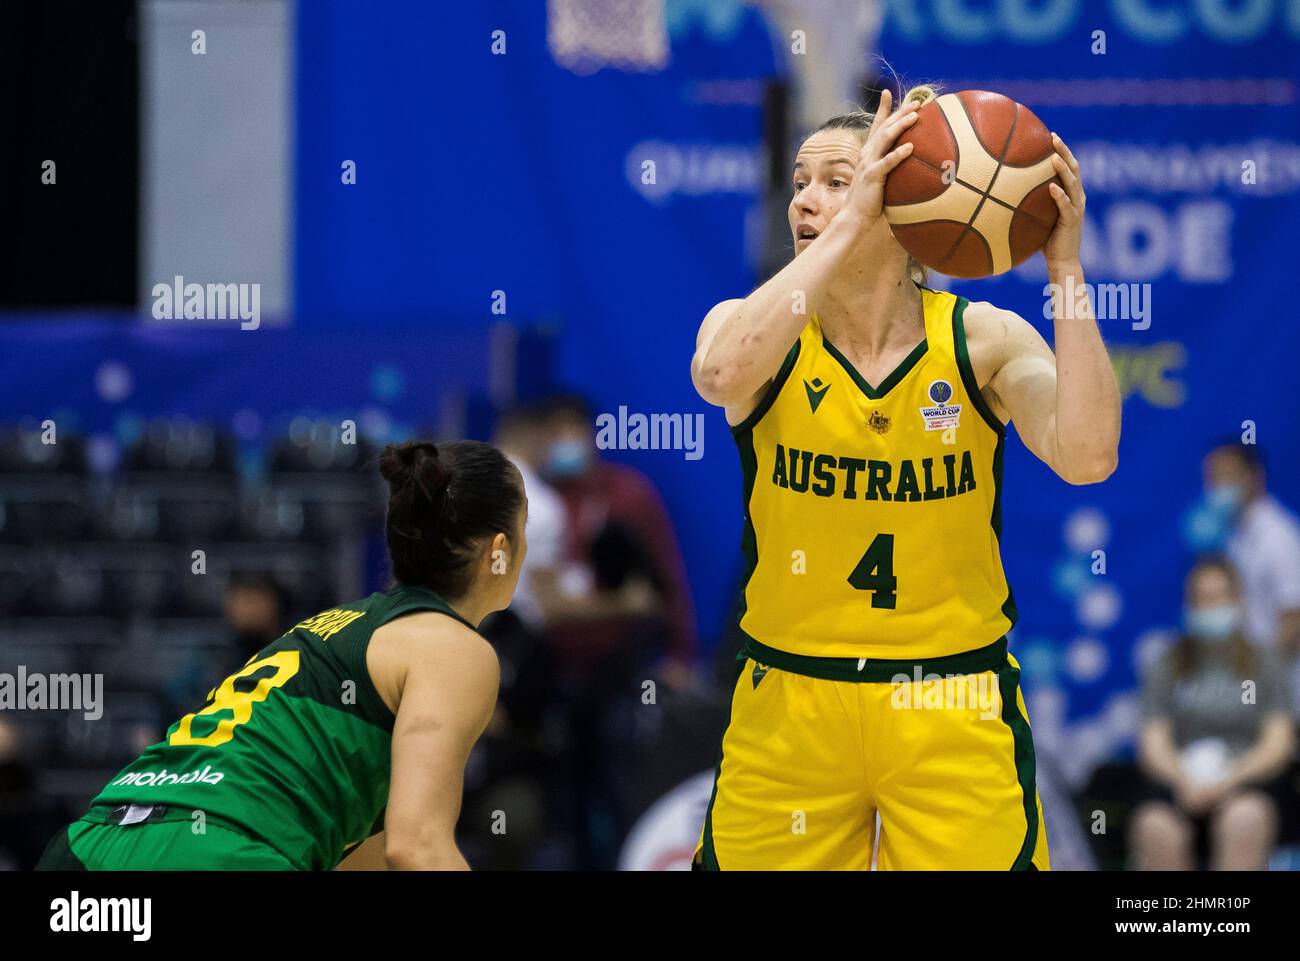 Belgrade, Serbia, 10th February 2022. Samantha Whitcomb of Australia in action during the FIBA Women's Basketball World Cup Qualifying Tournament match between Australia v Brazil in Belgrade, Serbia. February 10, 2022. Credit: Nikola Krstic/Alamy Stock Photo